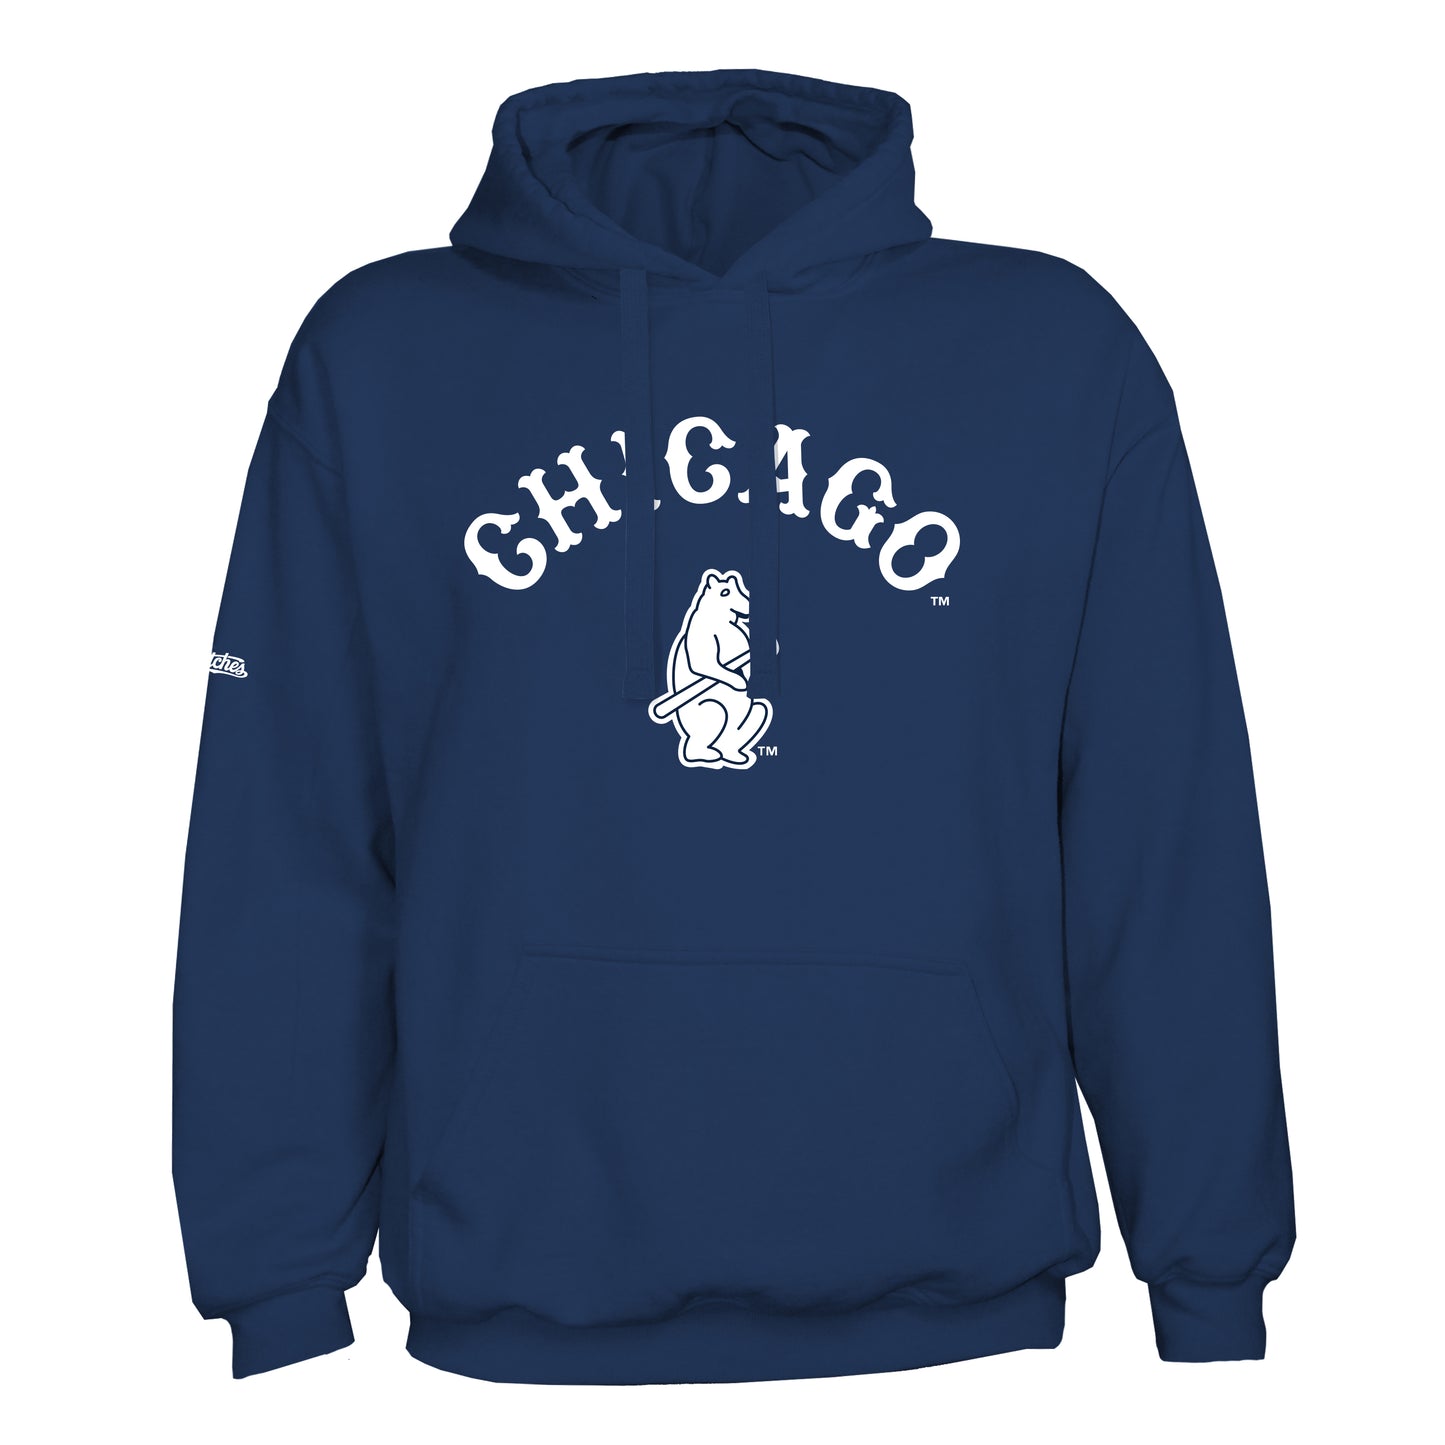 Chicago Cubs Navy 1914 Stitches Hoodie